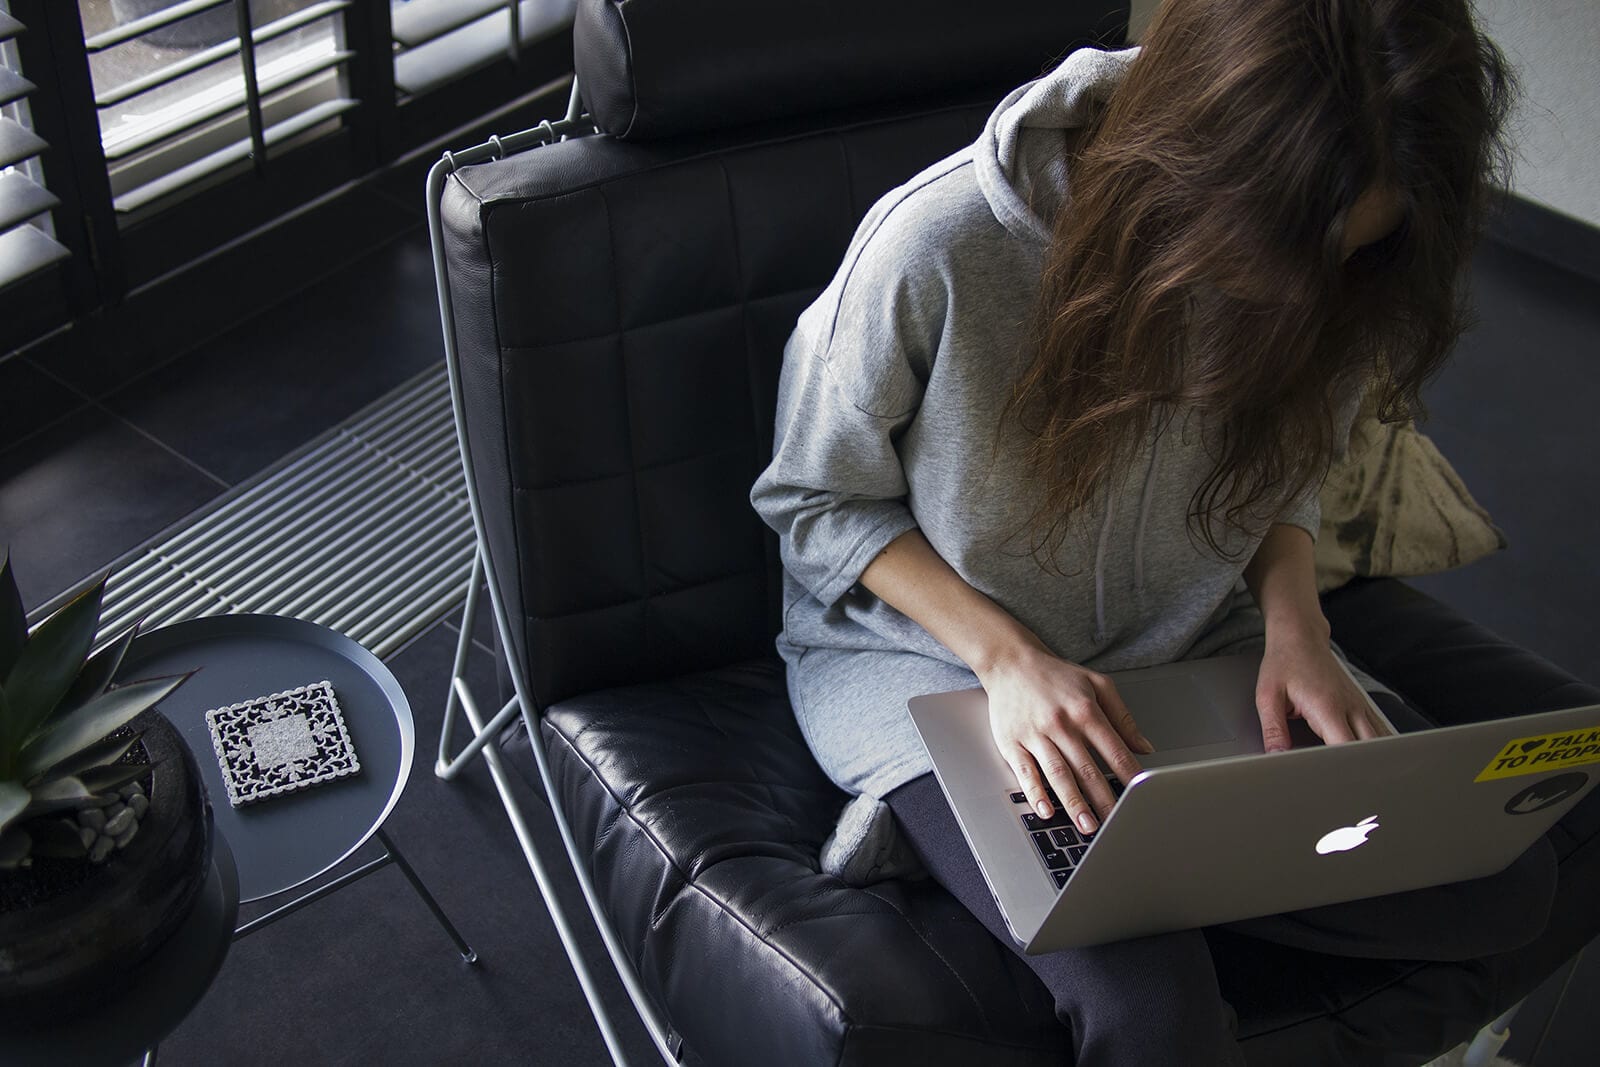 Woman sitting in black leather chair working on Apple laptop computer.